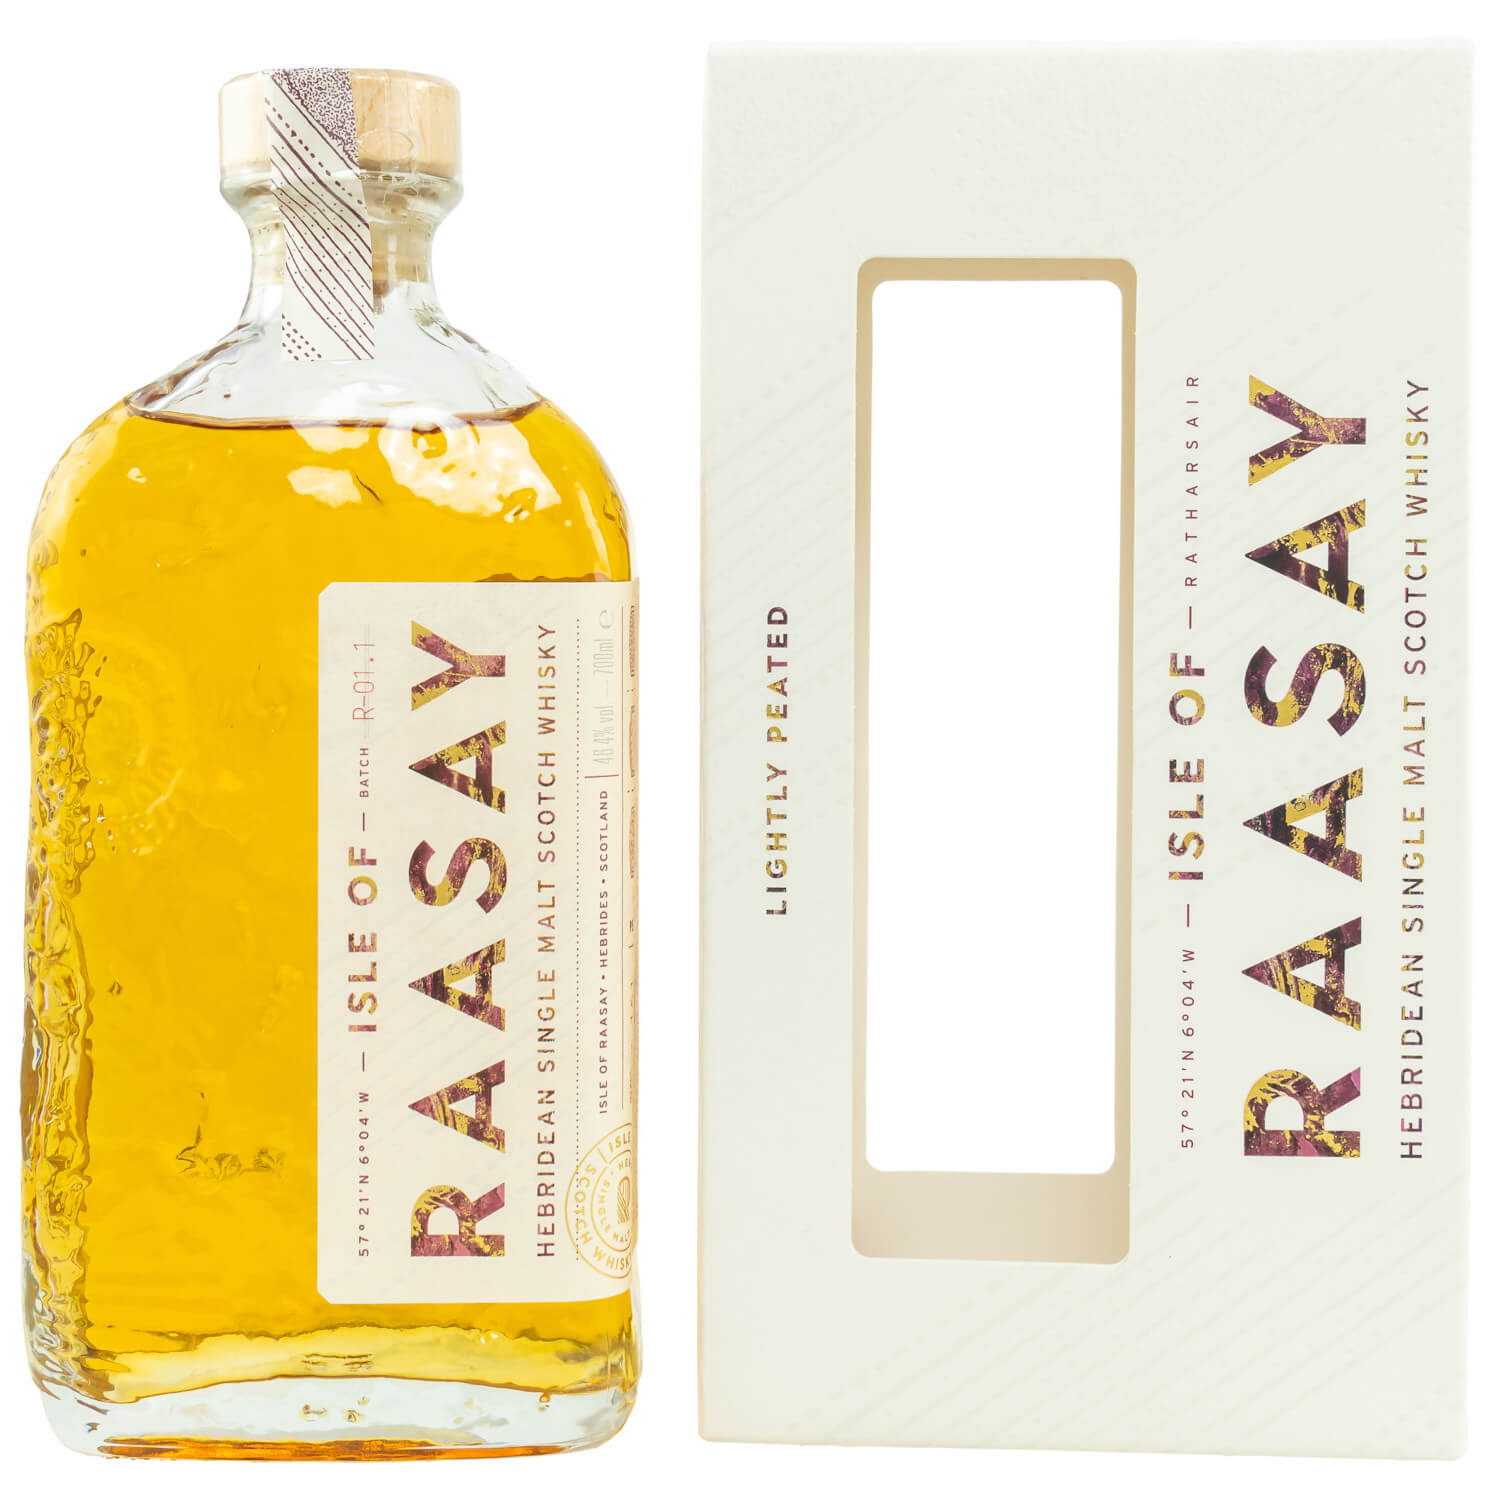 Flasche und Verpackung Isle of Raasay Single Malt Whisky Lightly Peated Batch R-01.1